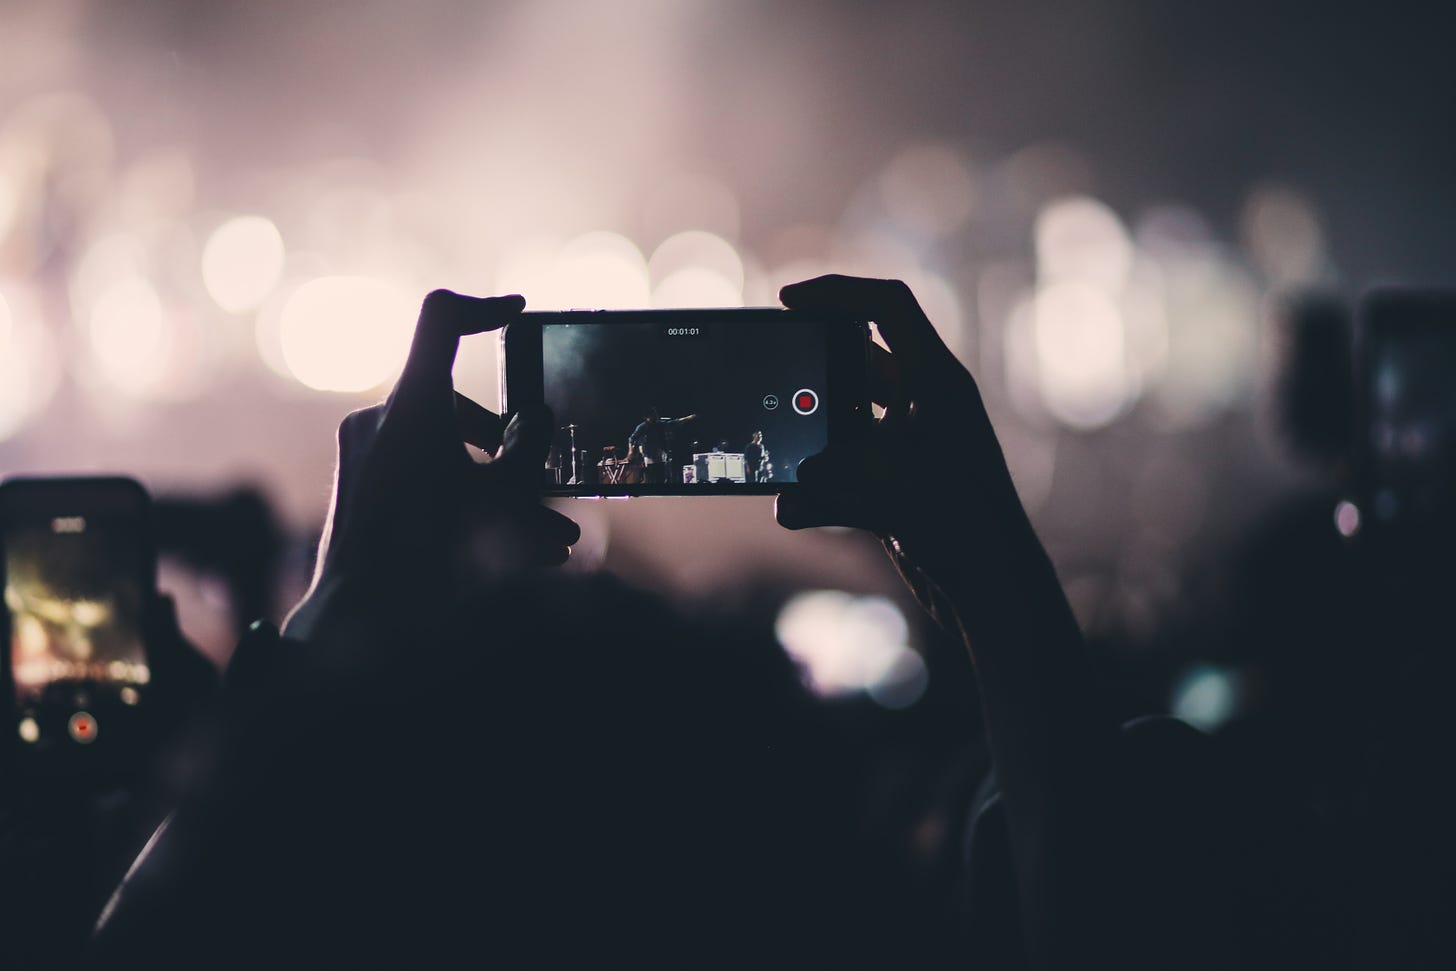 Photo of someone holding a mobile phone in landscape above a crowd, videoing a performance on the stage in the distance